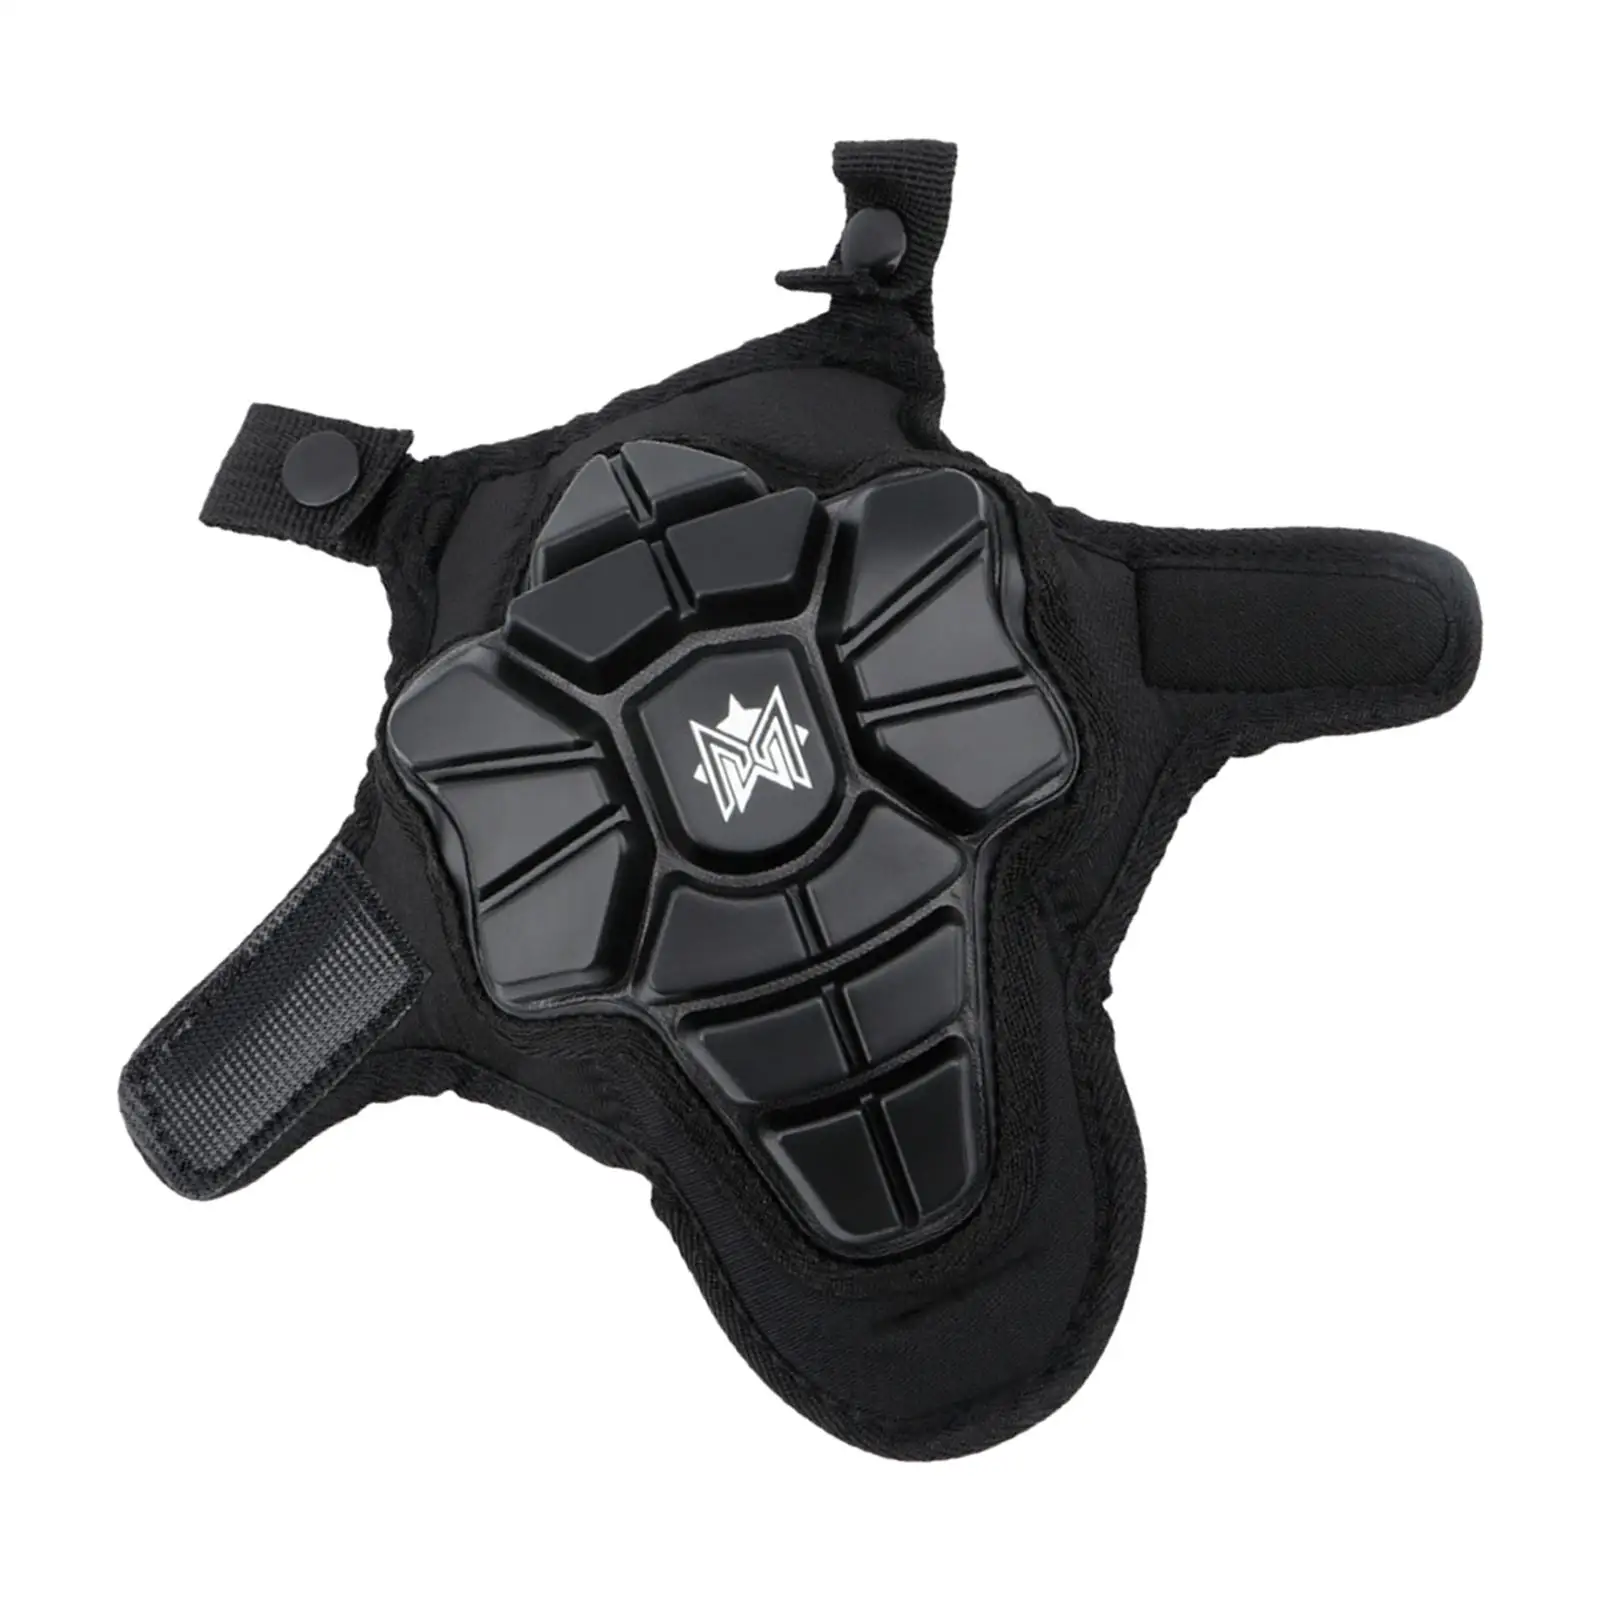 Scooter Stem Protective Cover Padded for Handlebar Cycling Accessorie Bike